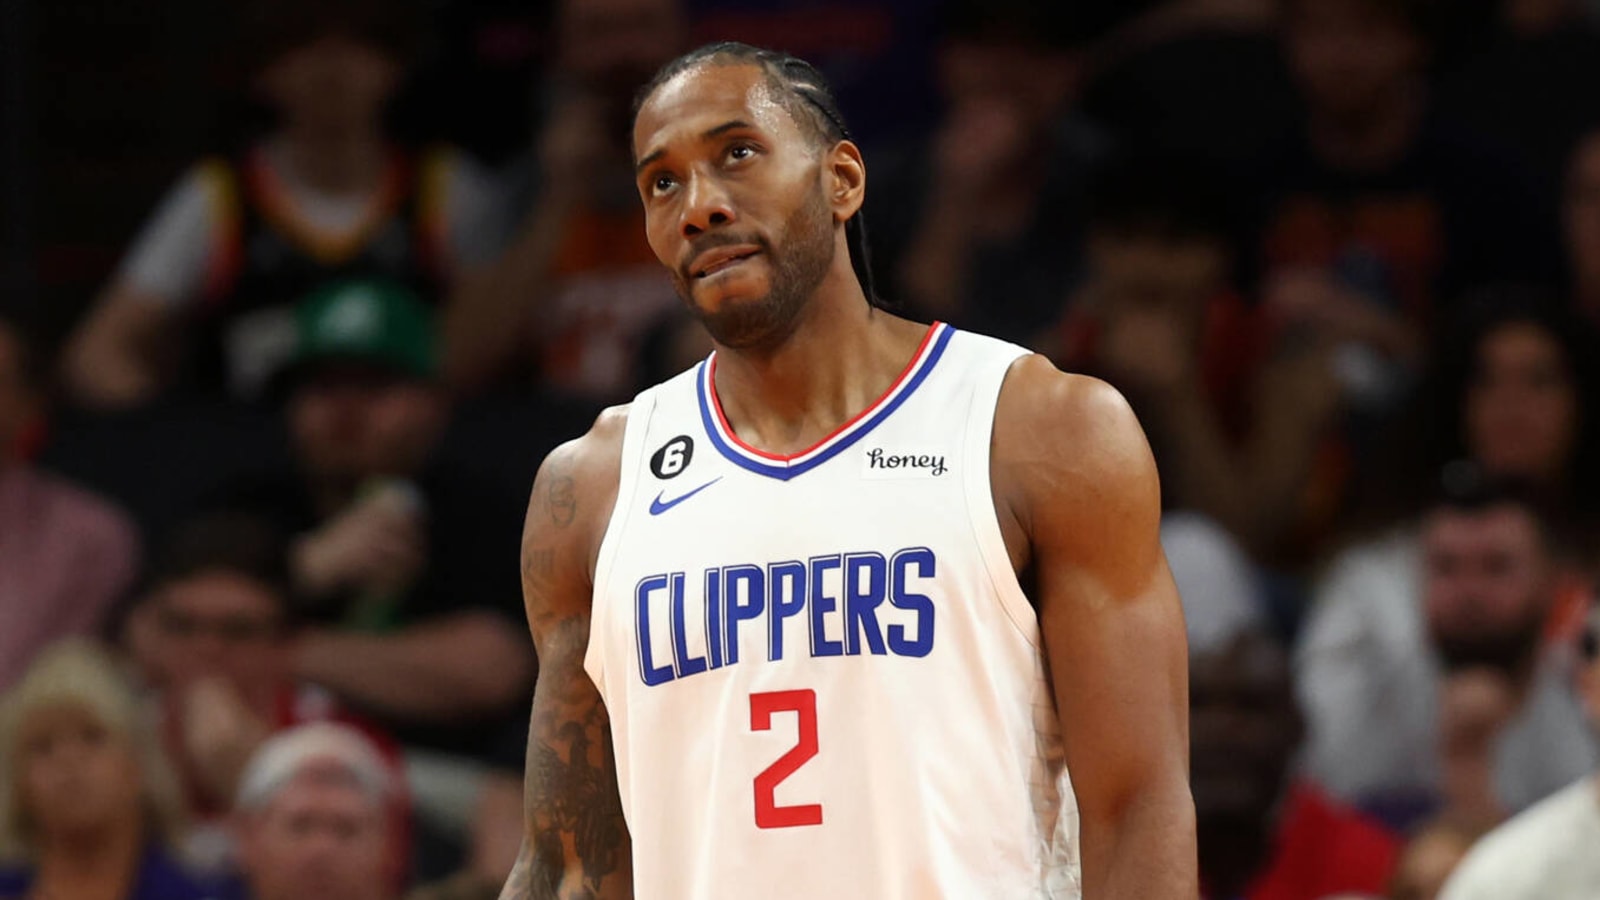 Would Clippers star consider joining 76ers next offseason?